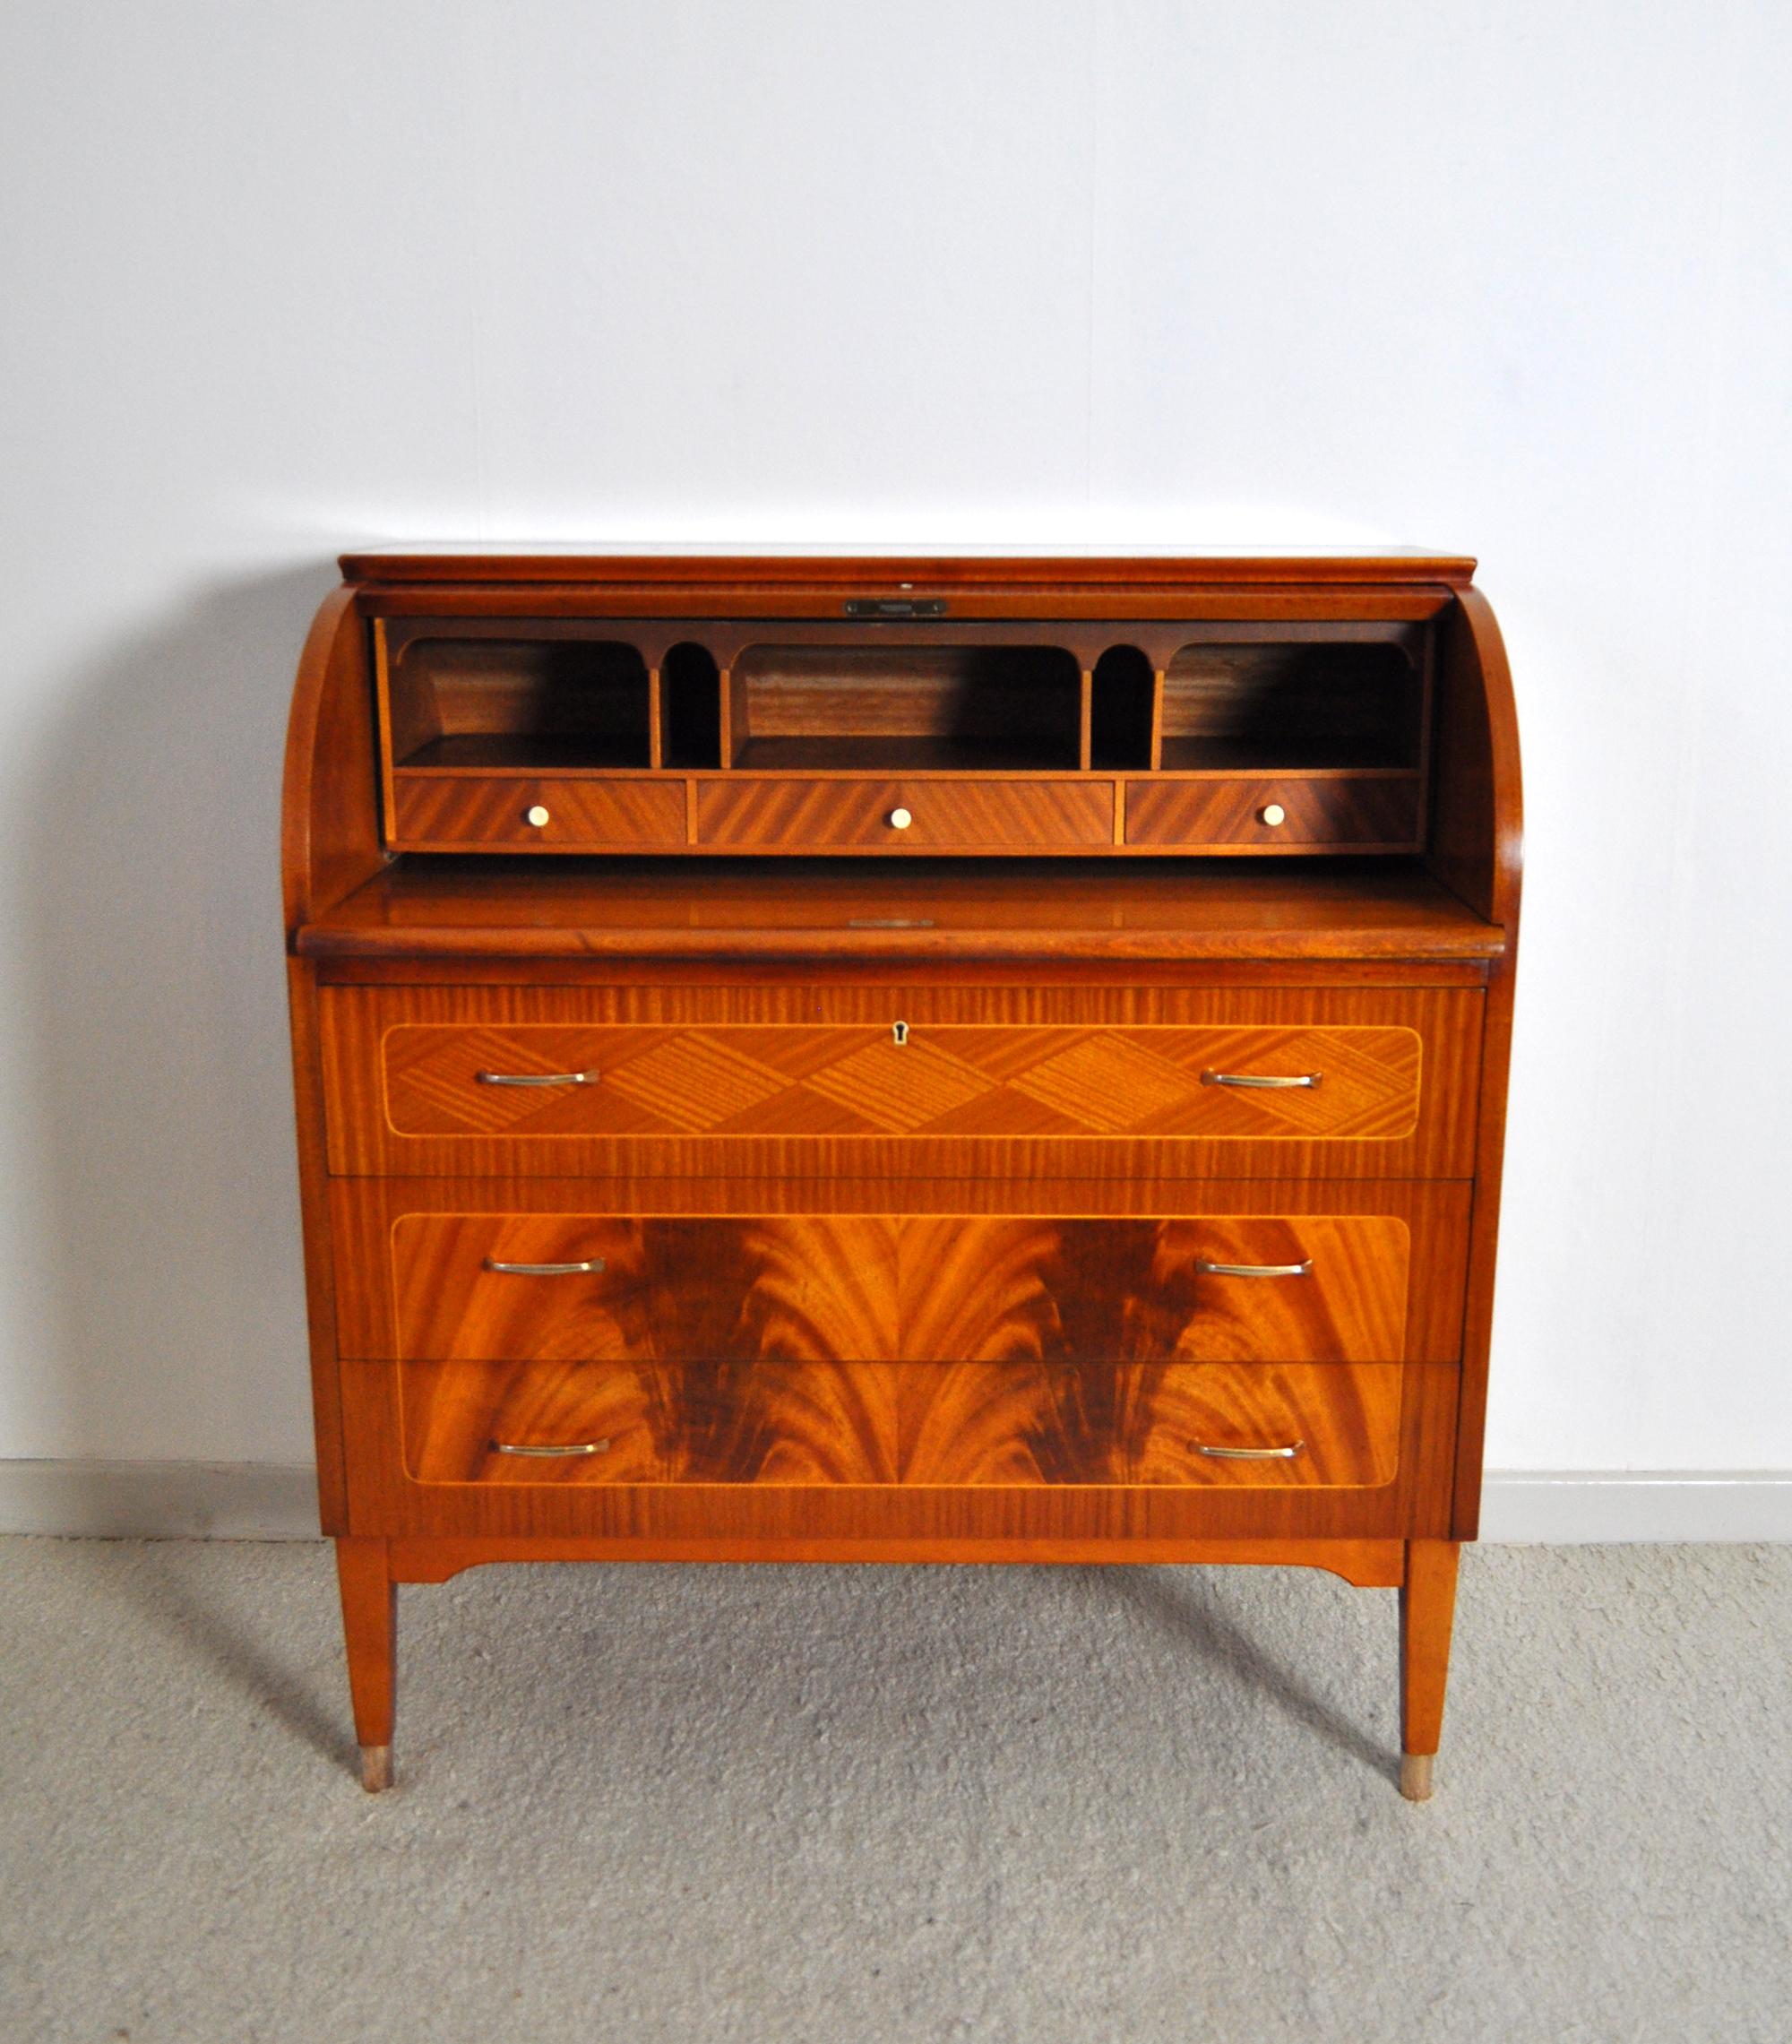 Swedish cabinetmaker roll-top secretary with a pull out / pull-out writing desk. Made in mahogany with beautiful inlaid parquetry details. Top rolls up to reveal cubby holes and 3 small drawers. Lower section has three large drawers with solid brass